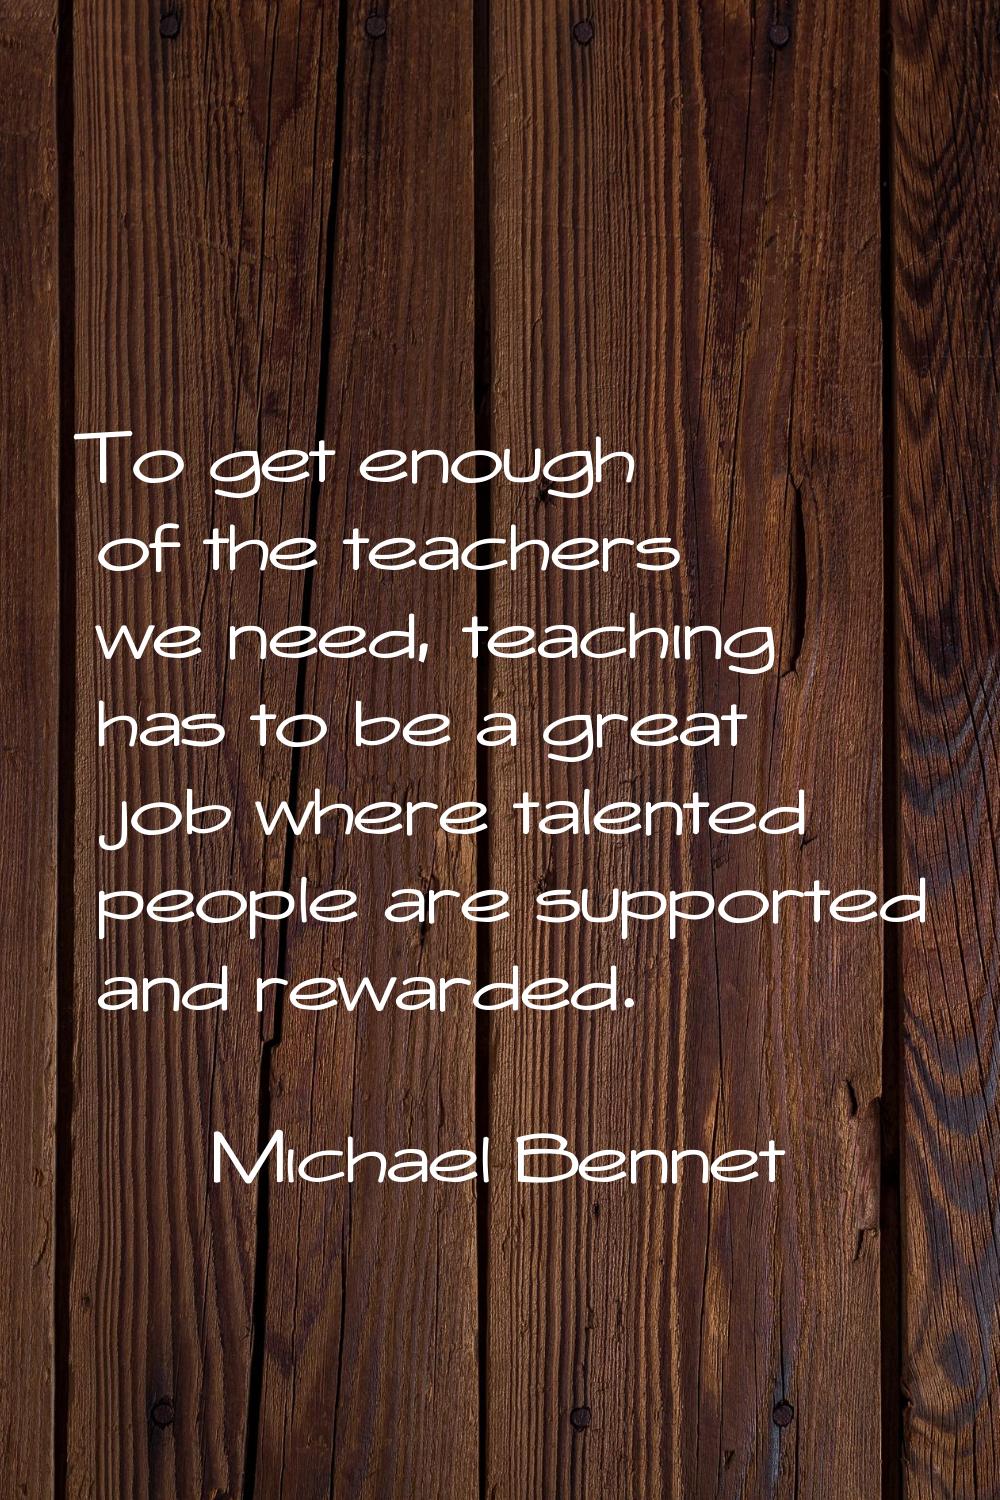 To get enough of the teachers we need, teaching has to be a great job where talented people are sup